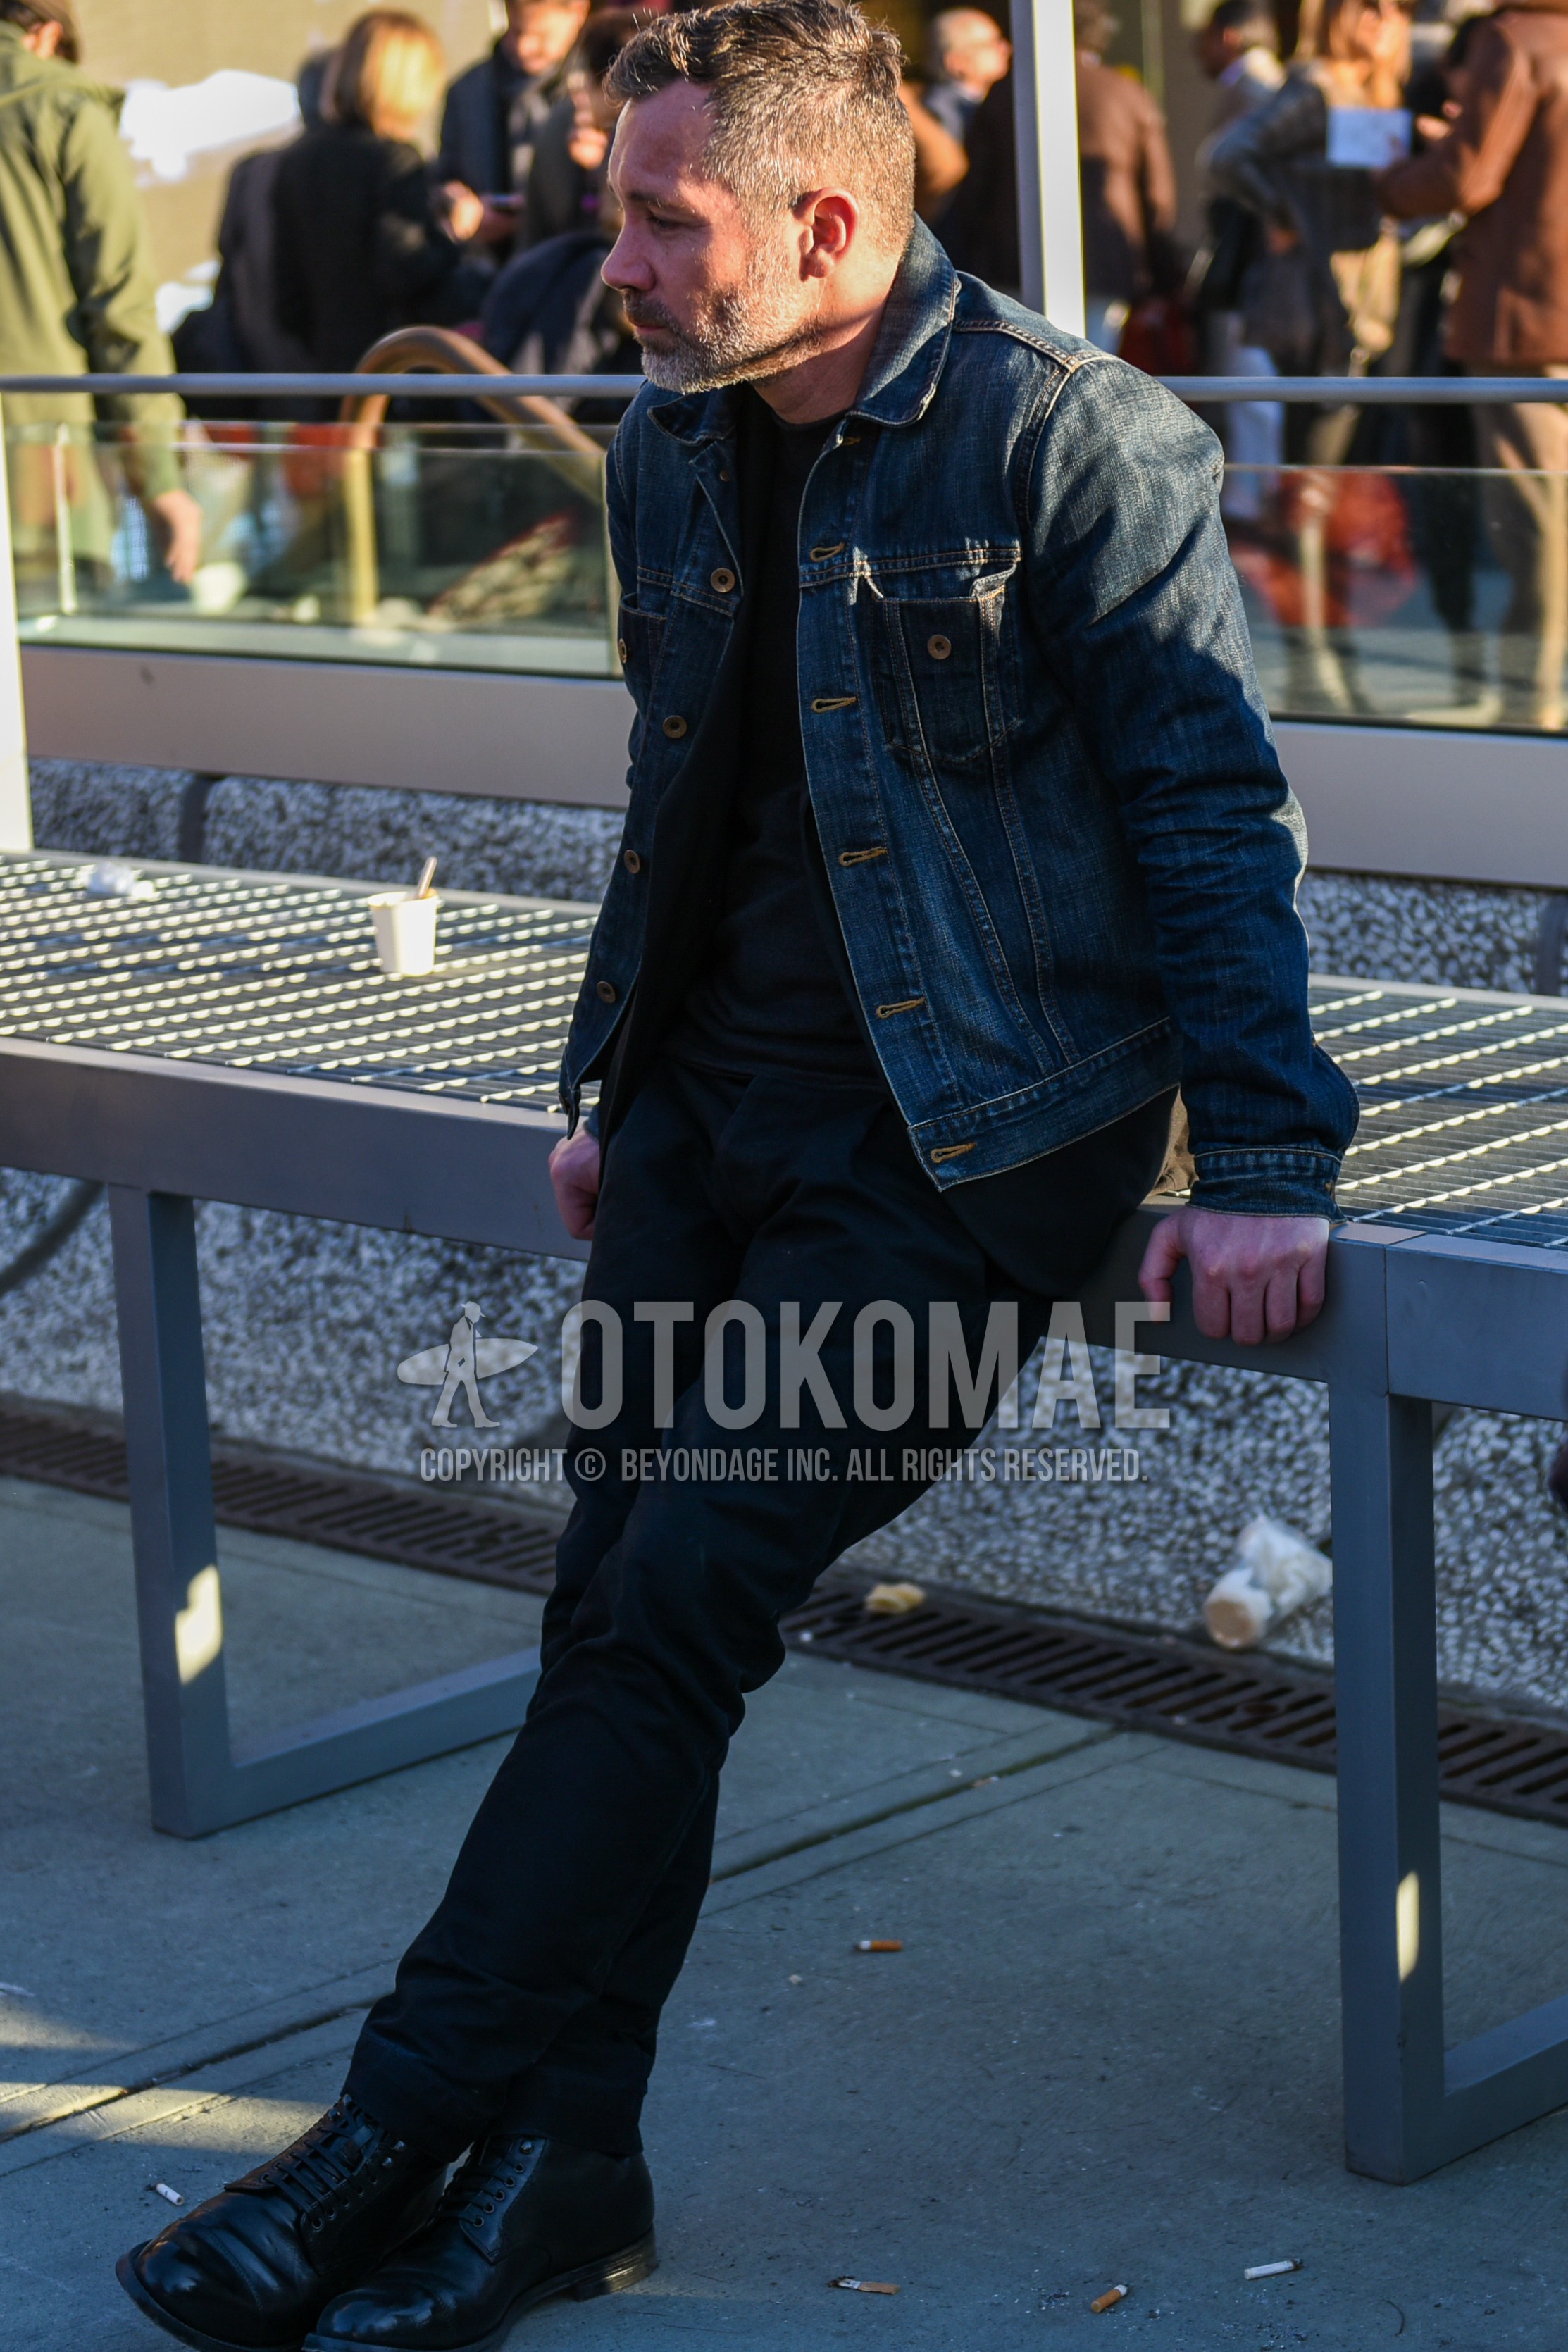 Men's spring autumn outfit with navy plain denim jacket, black plain sweater, black plain denim/jeans, black  boots.